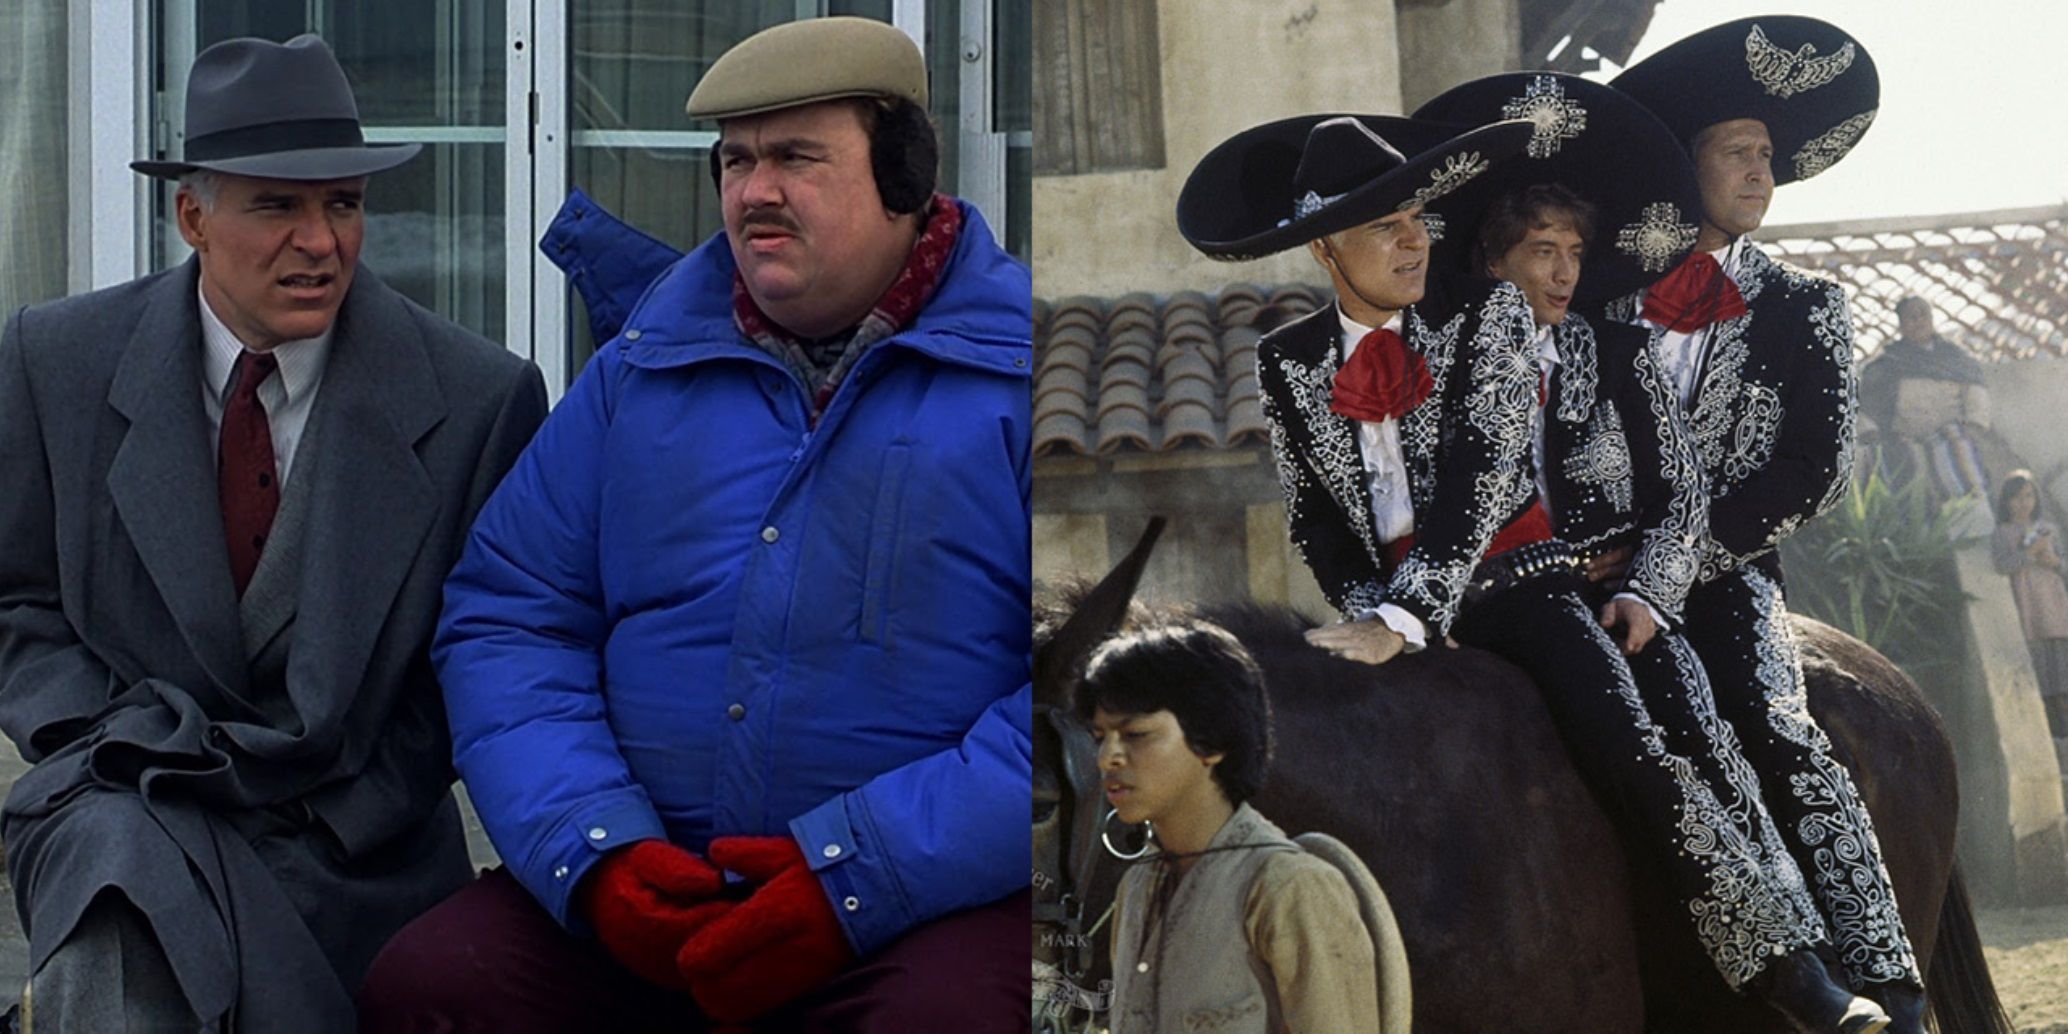 Split image of Del and Neal in Planes, Trains and Automobiles and the Three Amigos on horseback